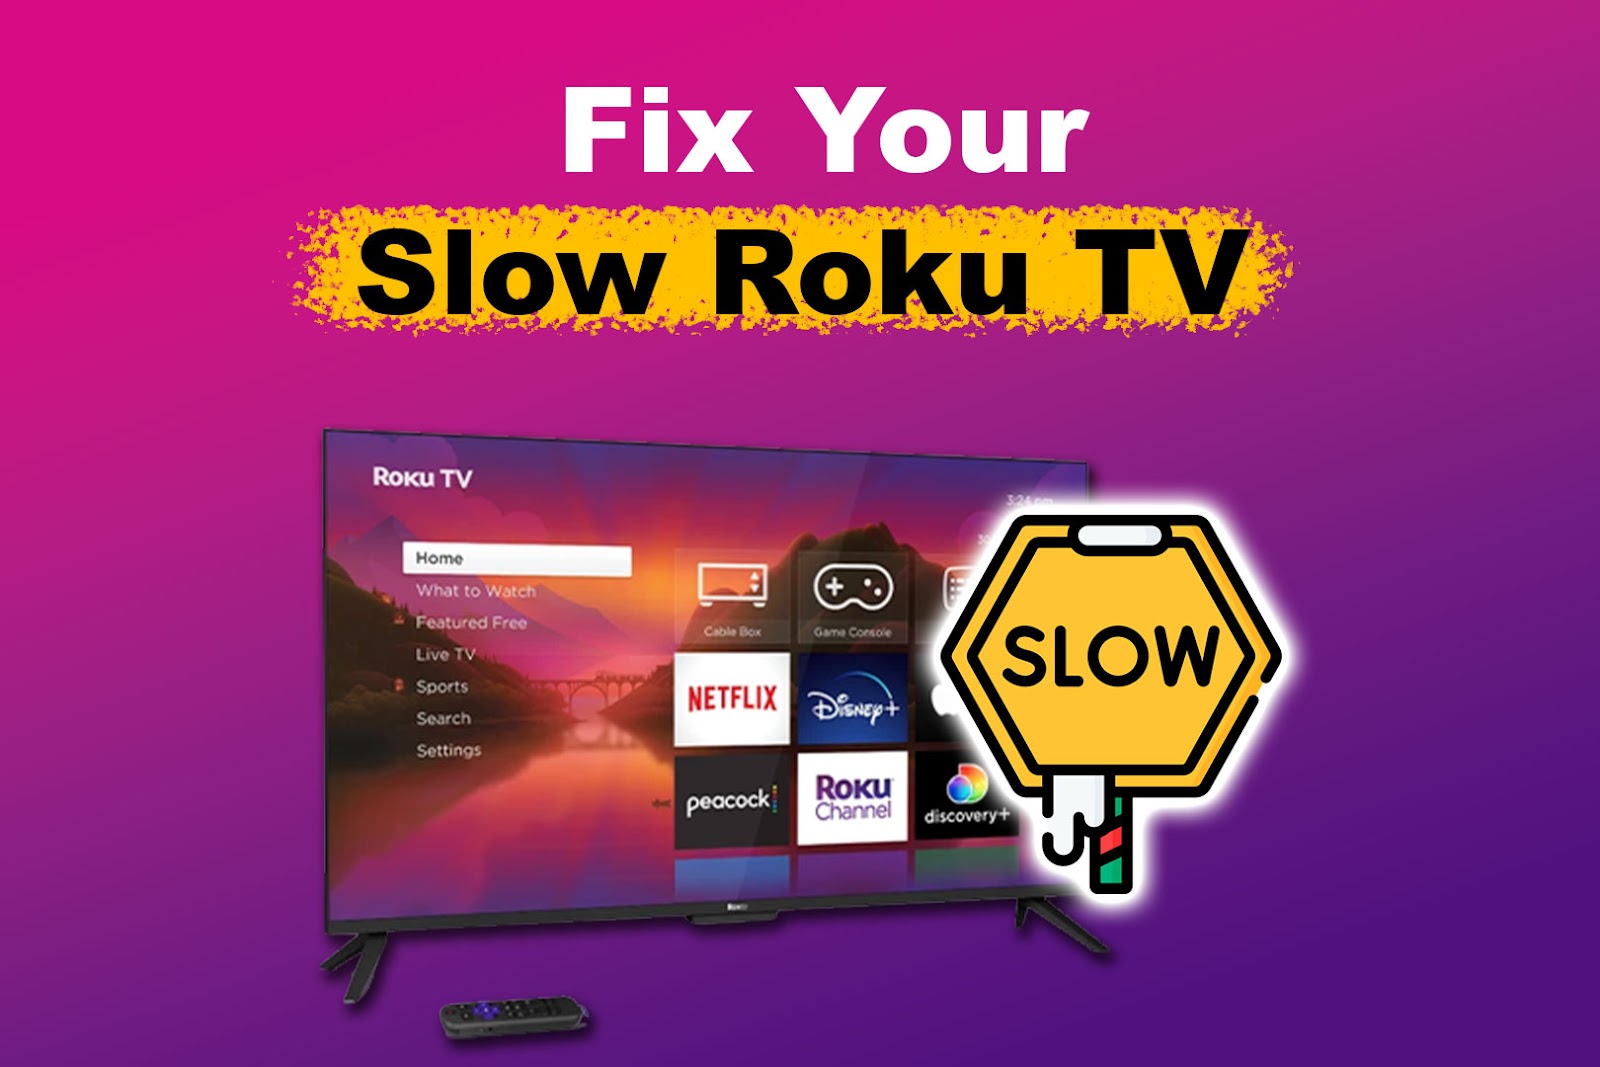 Is Your Roku TV Slow? Here’s How to Fix It